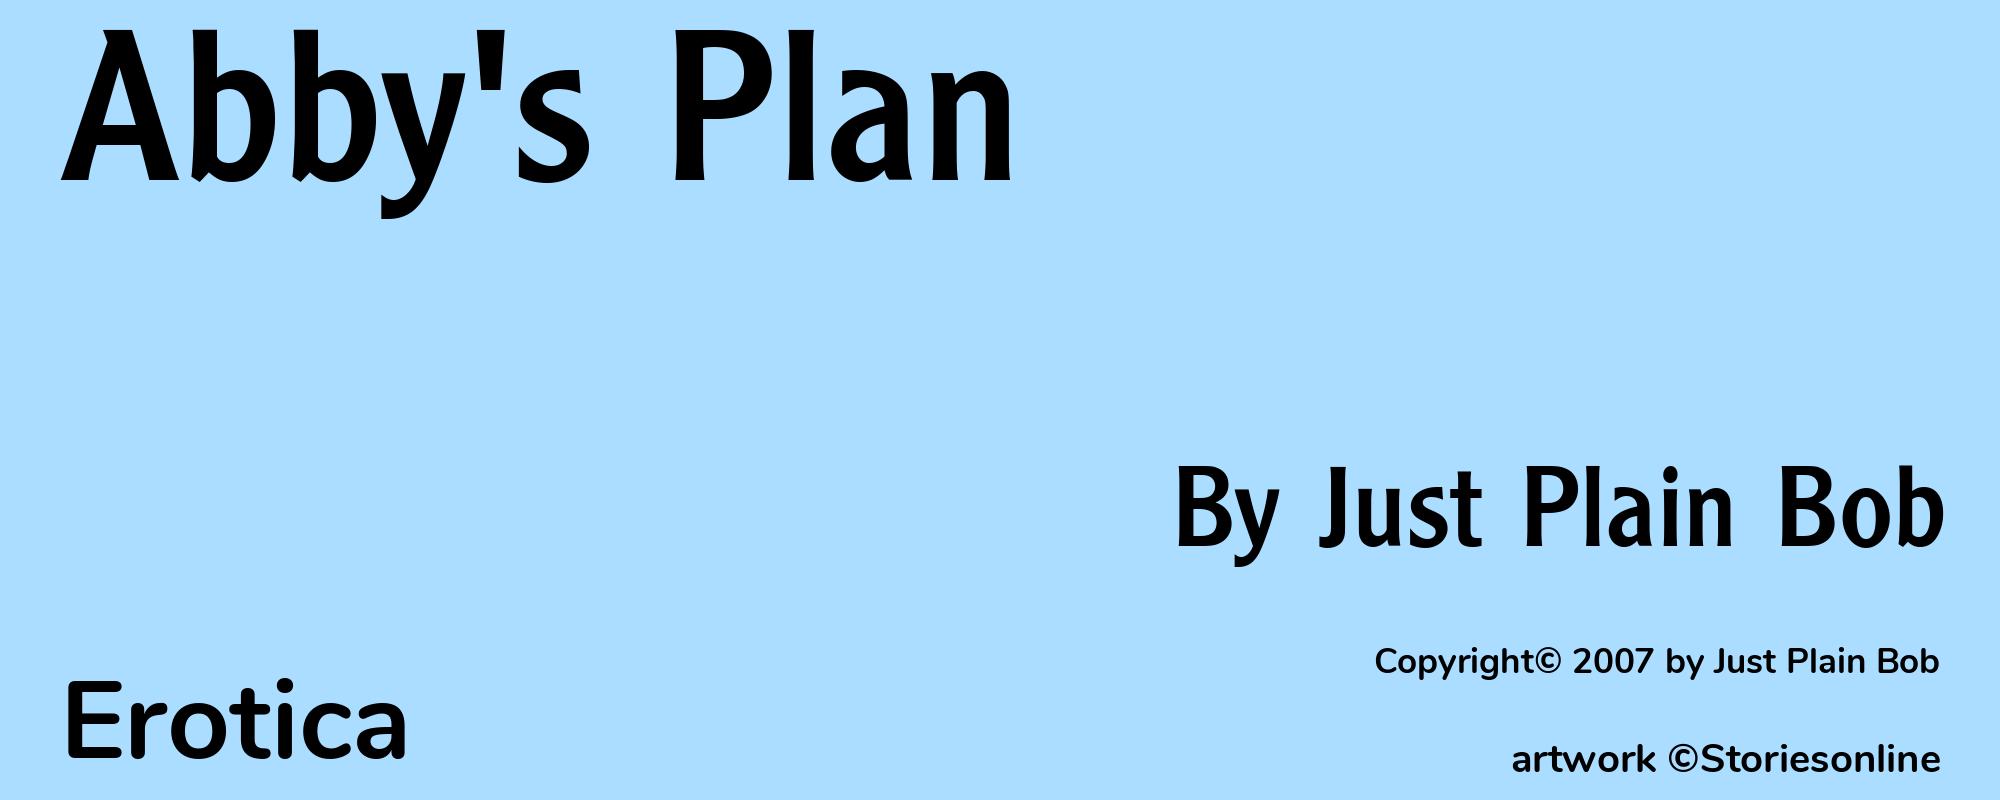 Abby's Plan - Cover